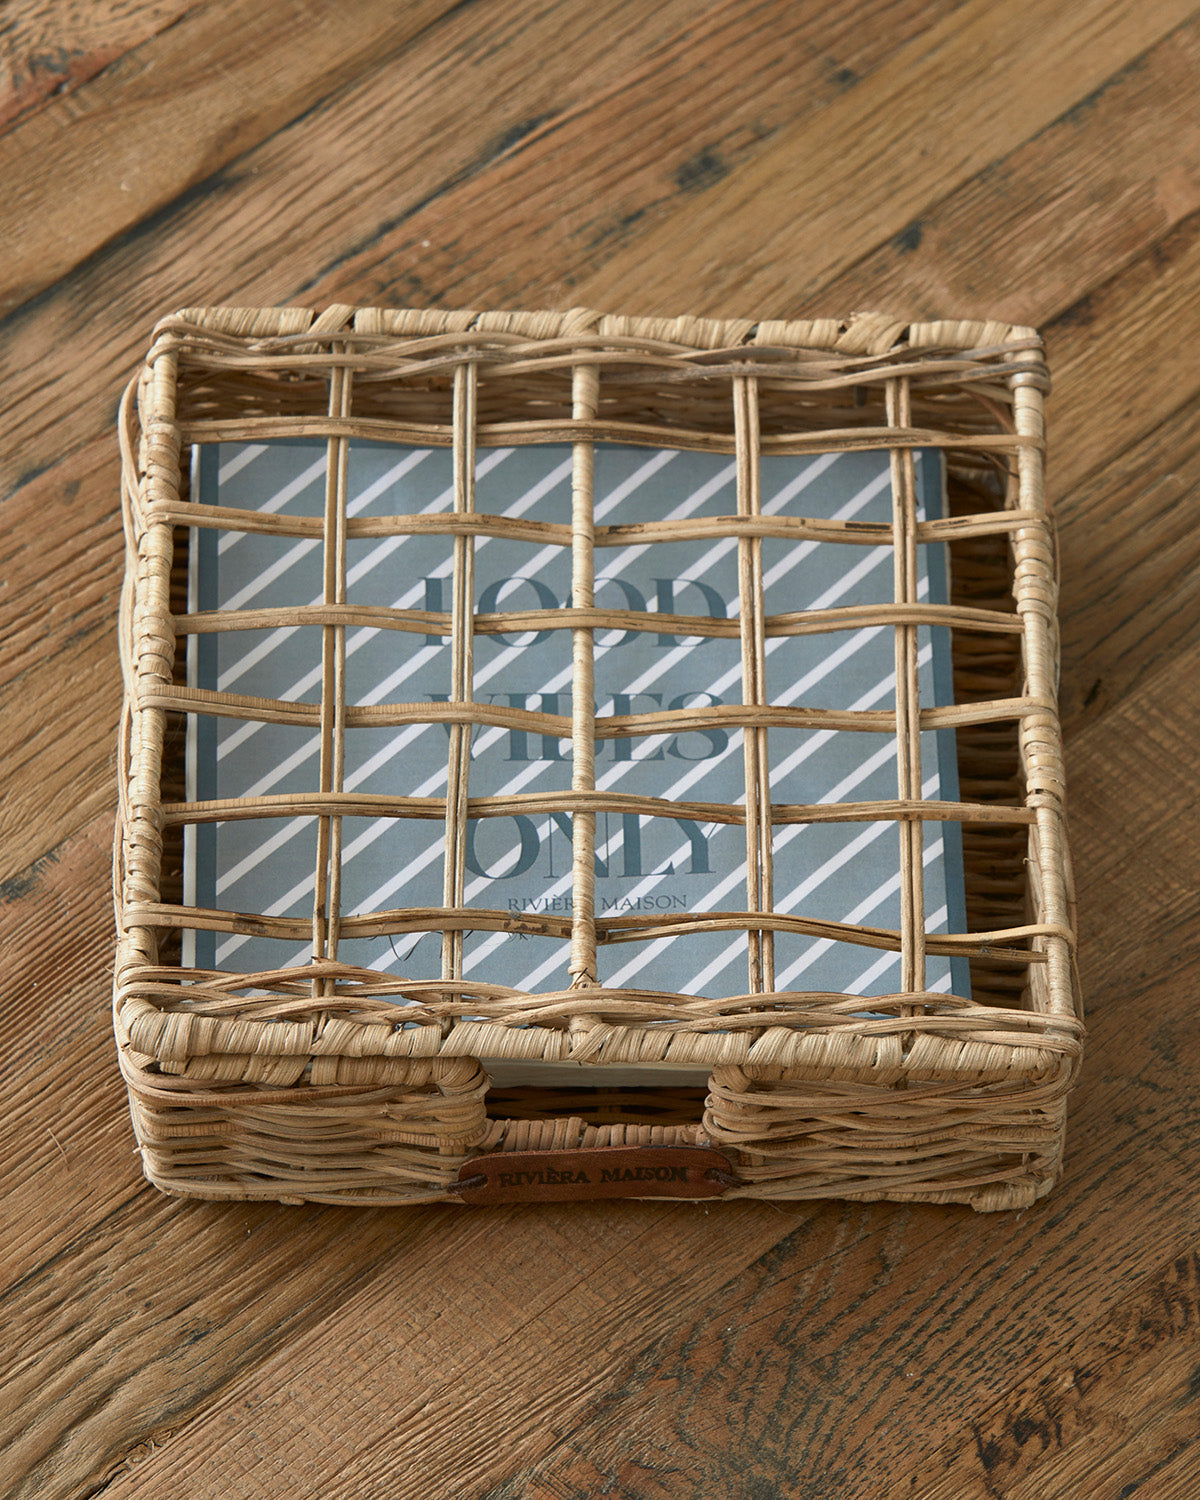 NAPKIN HOLDER rustic rattan woven, decorated with napkins by Riviera Maison